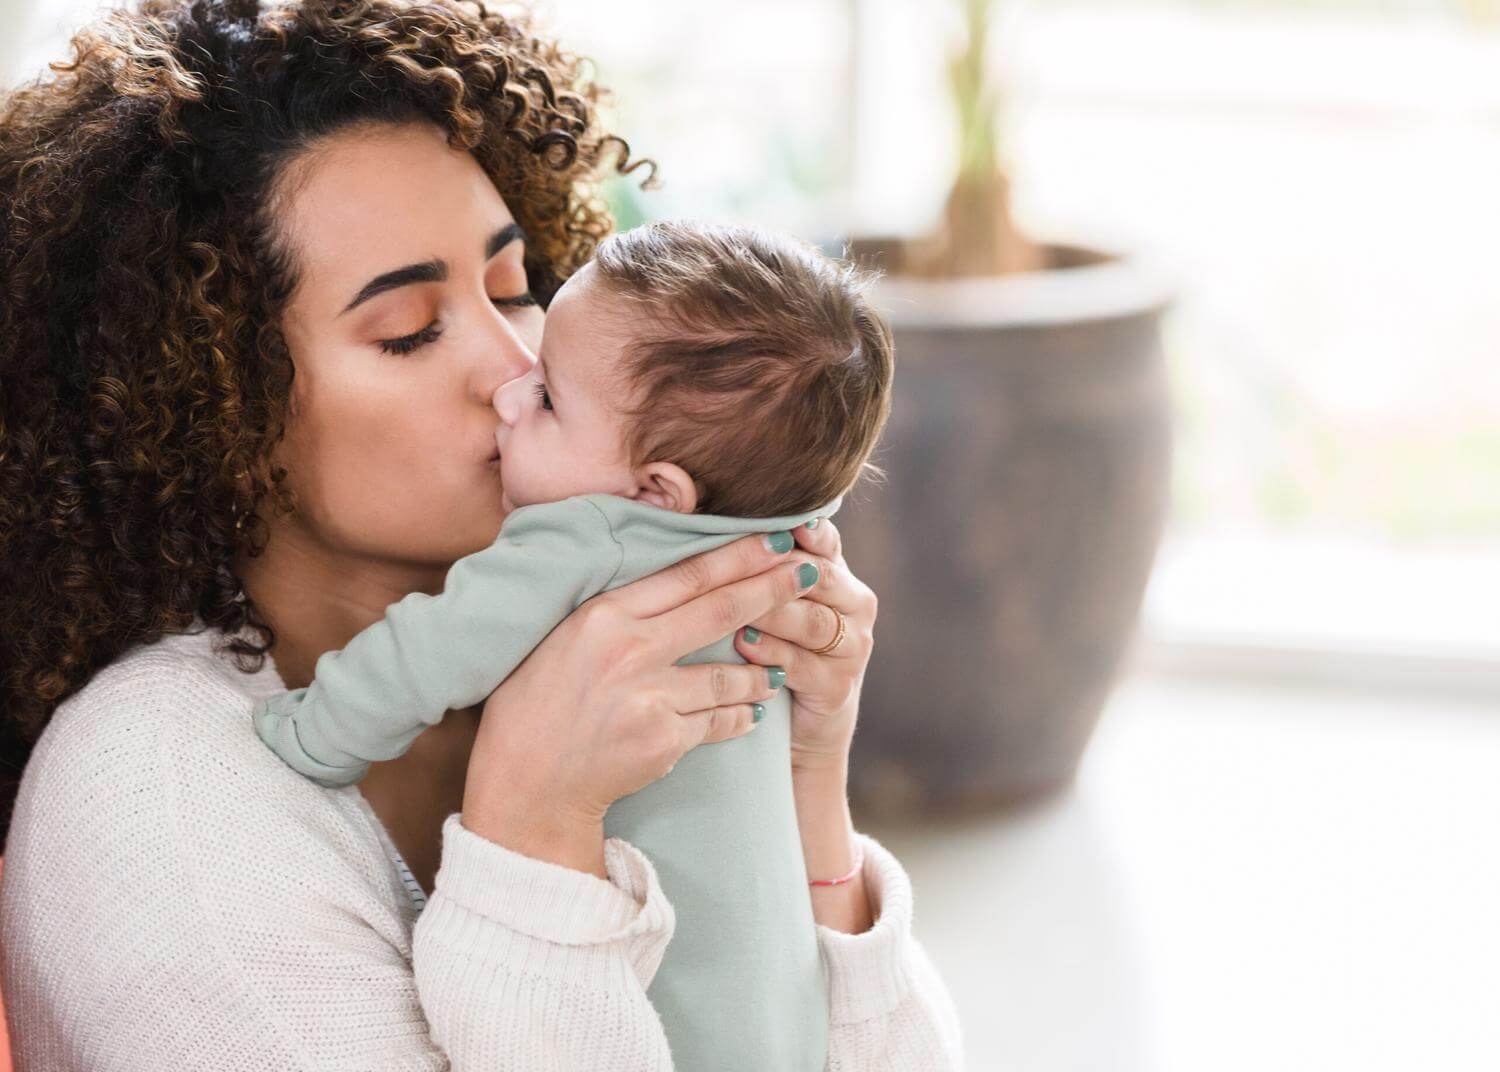 Woman holding baby close and kissing their cheek